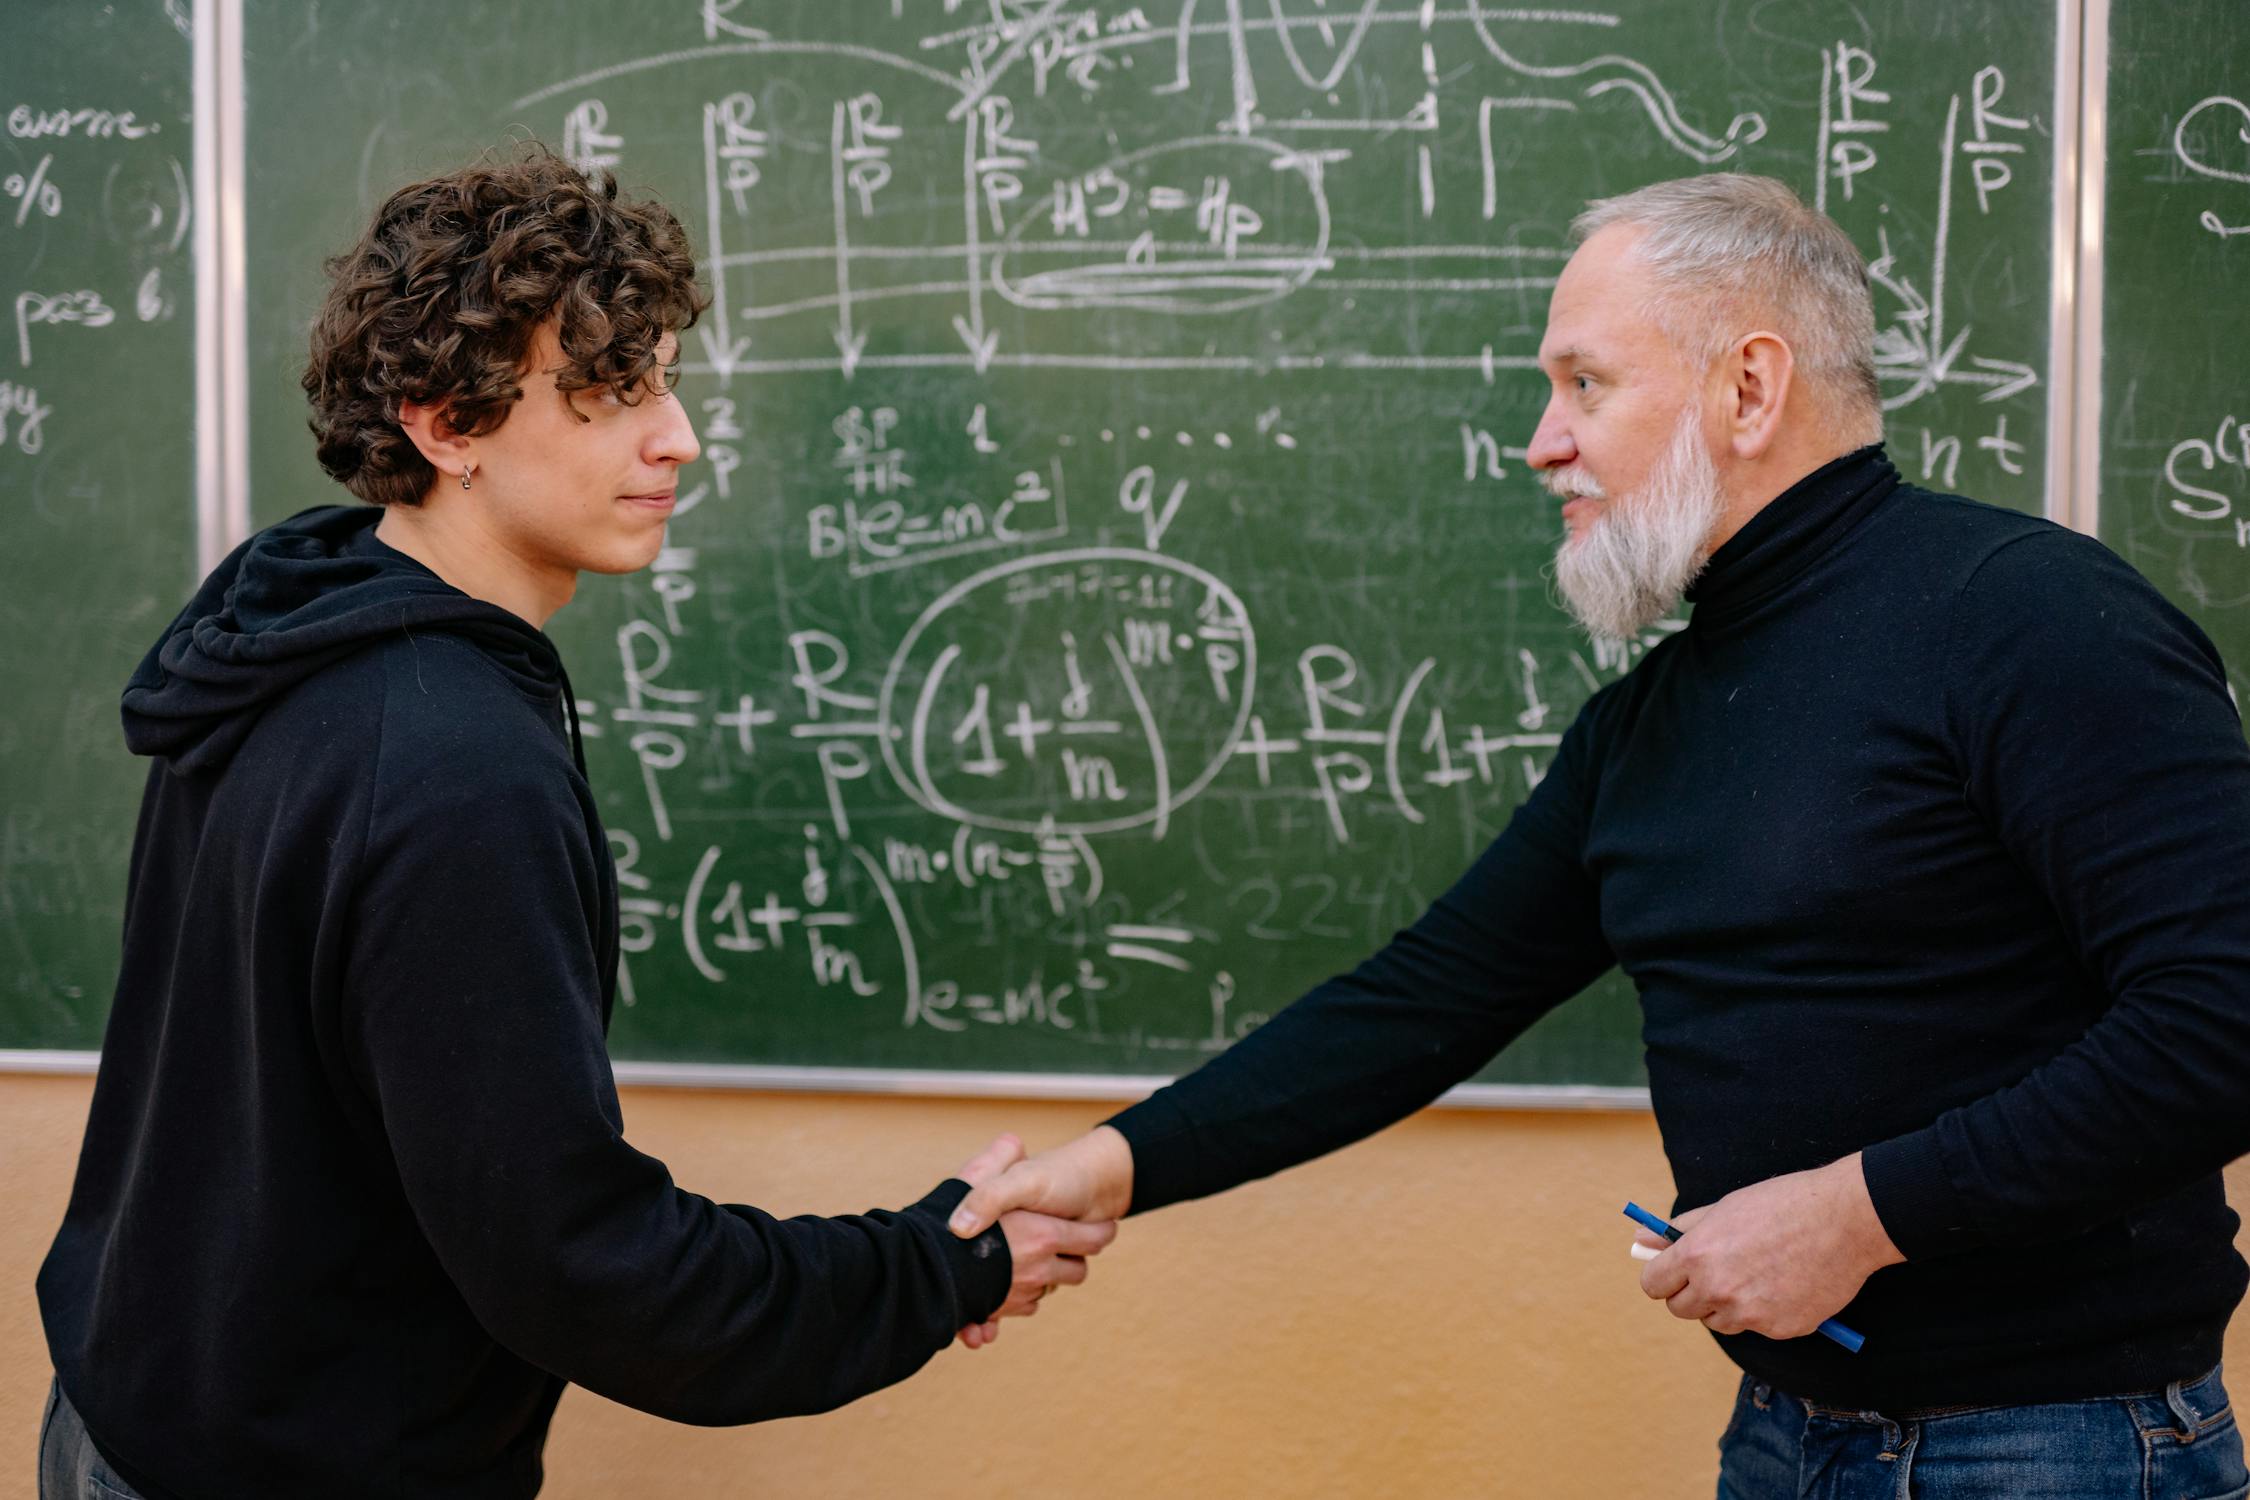 A student and a professor shaking hands